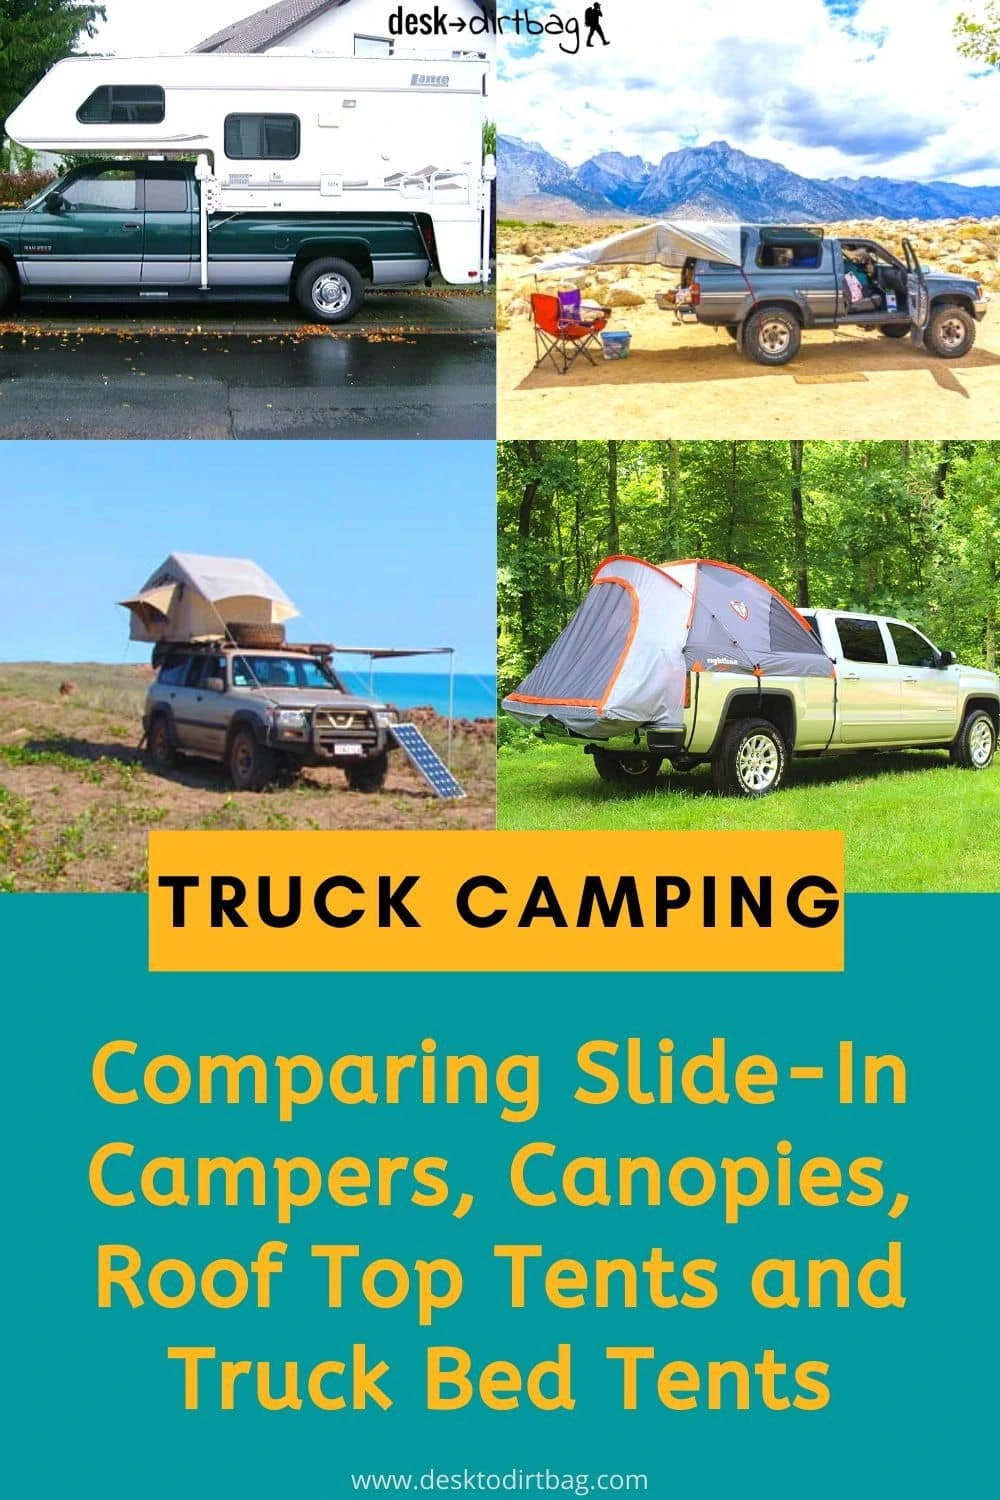 Comparing Roof Top Tents, Canopies, Slide-In Campers, and Truck Bed Tents truck-camping, travel